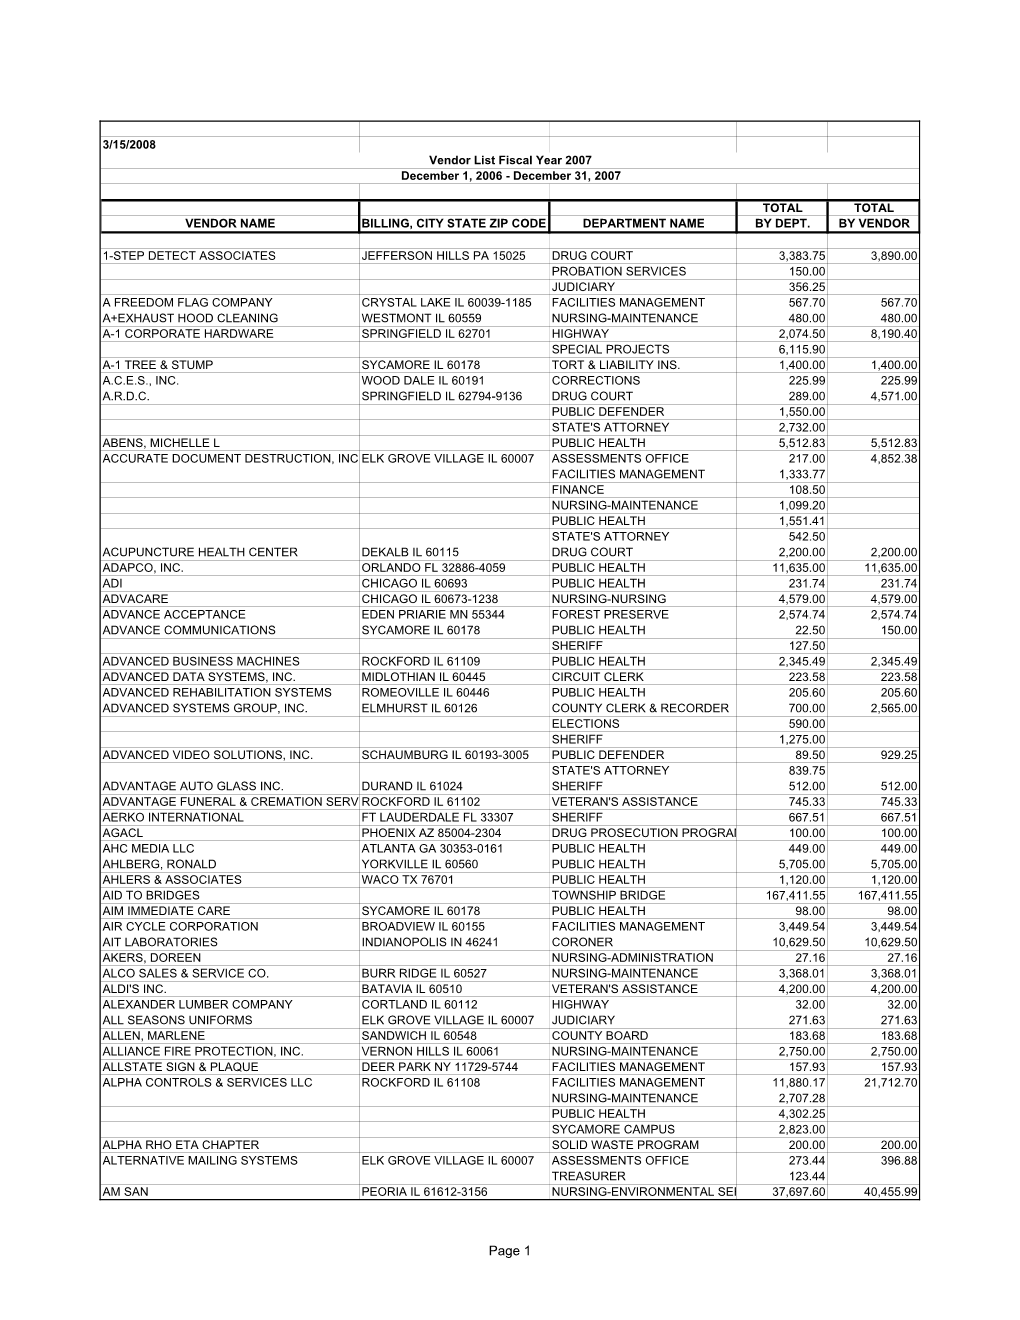 Page 1 3/15/2008 Vendor List Fiscal Year 2007 December 1, 2006 - December 31, 2007